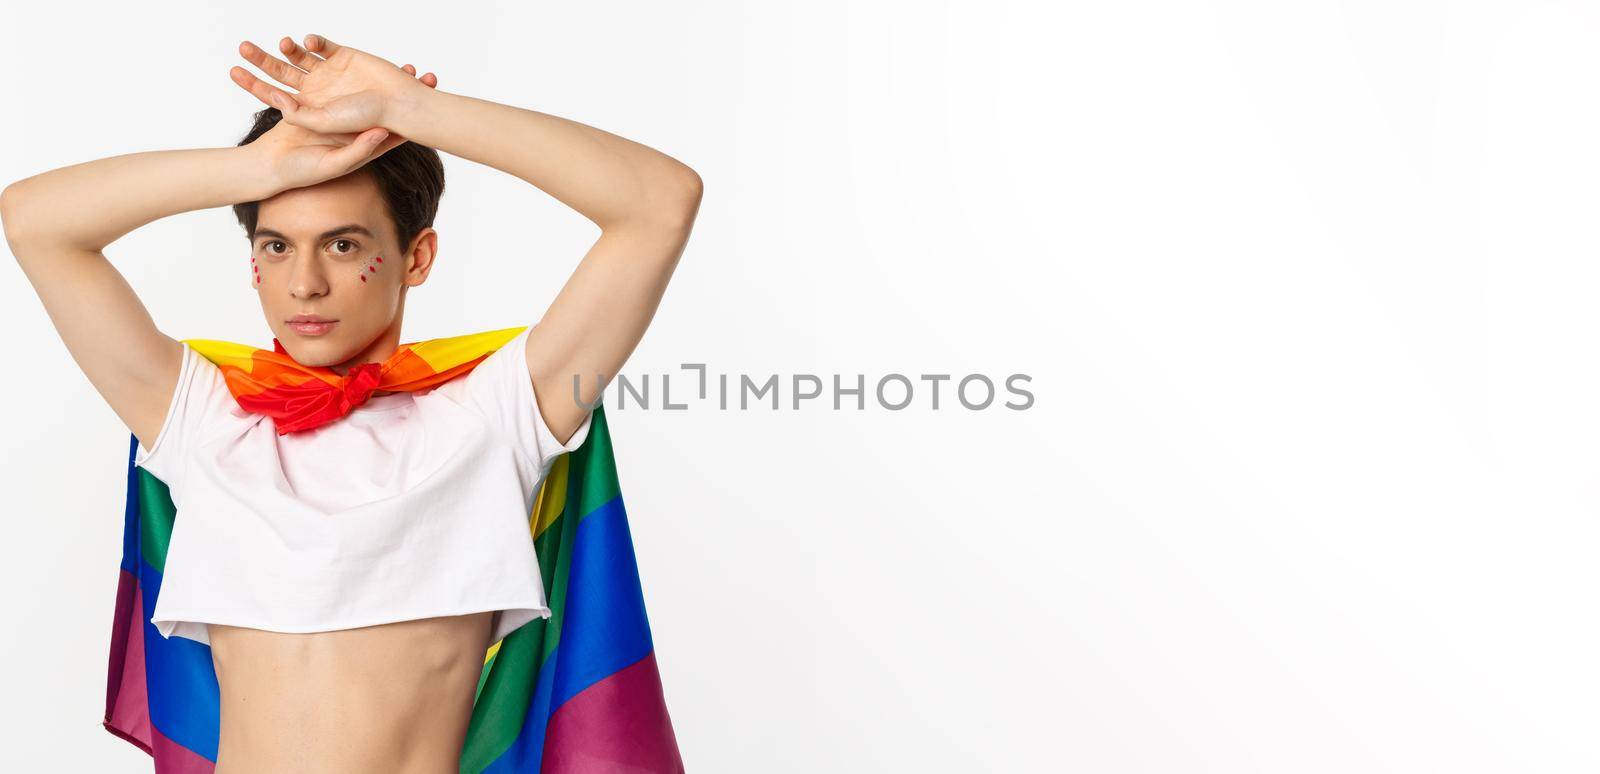 Beautiful gay man with glitter on face, wearing crop top and rainbow lgbt flag, posing against white background.